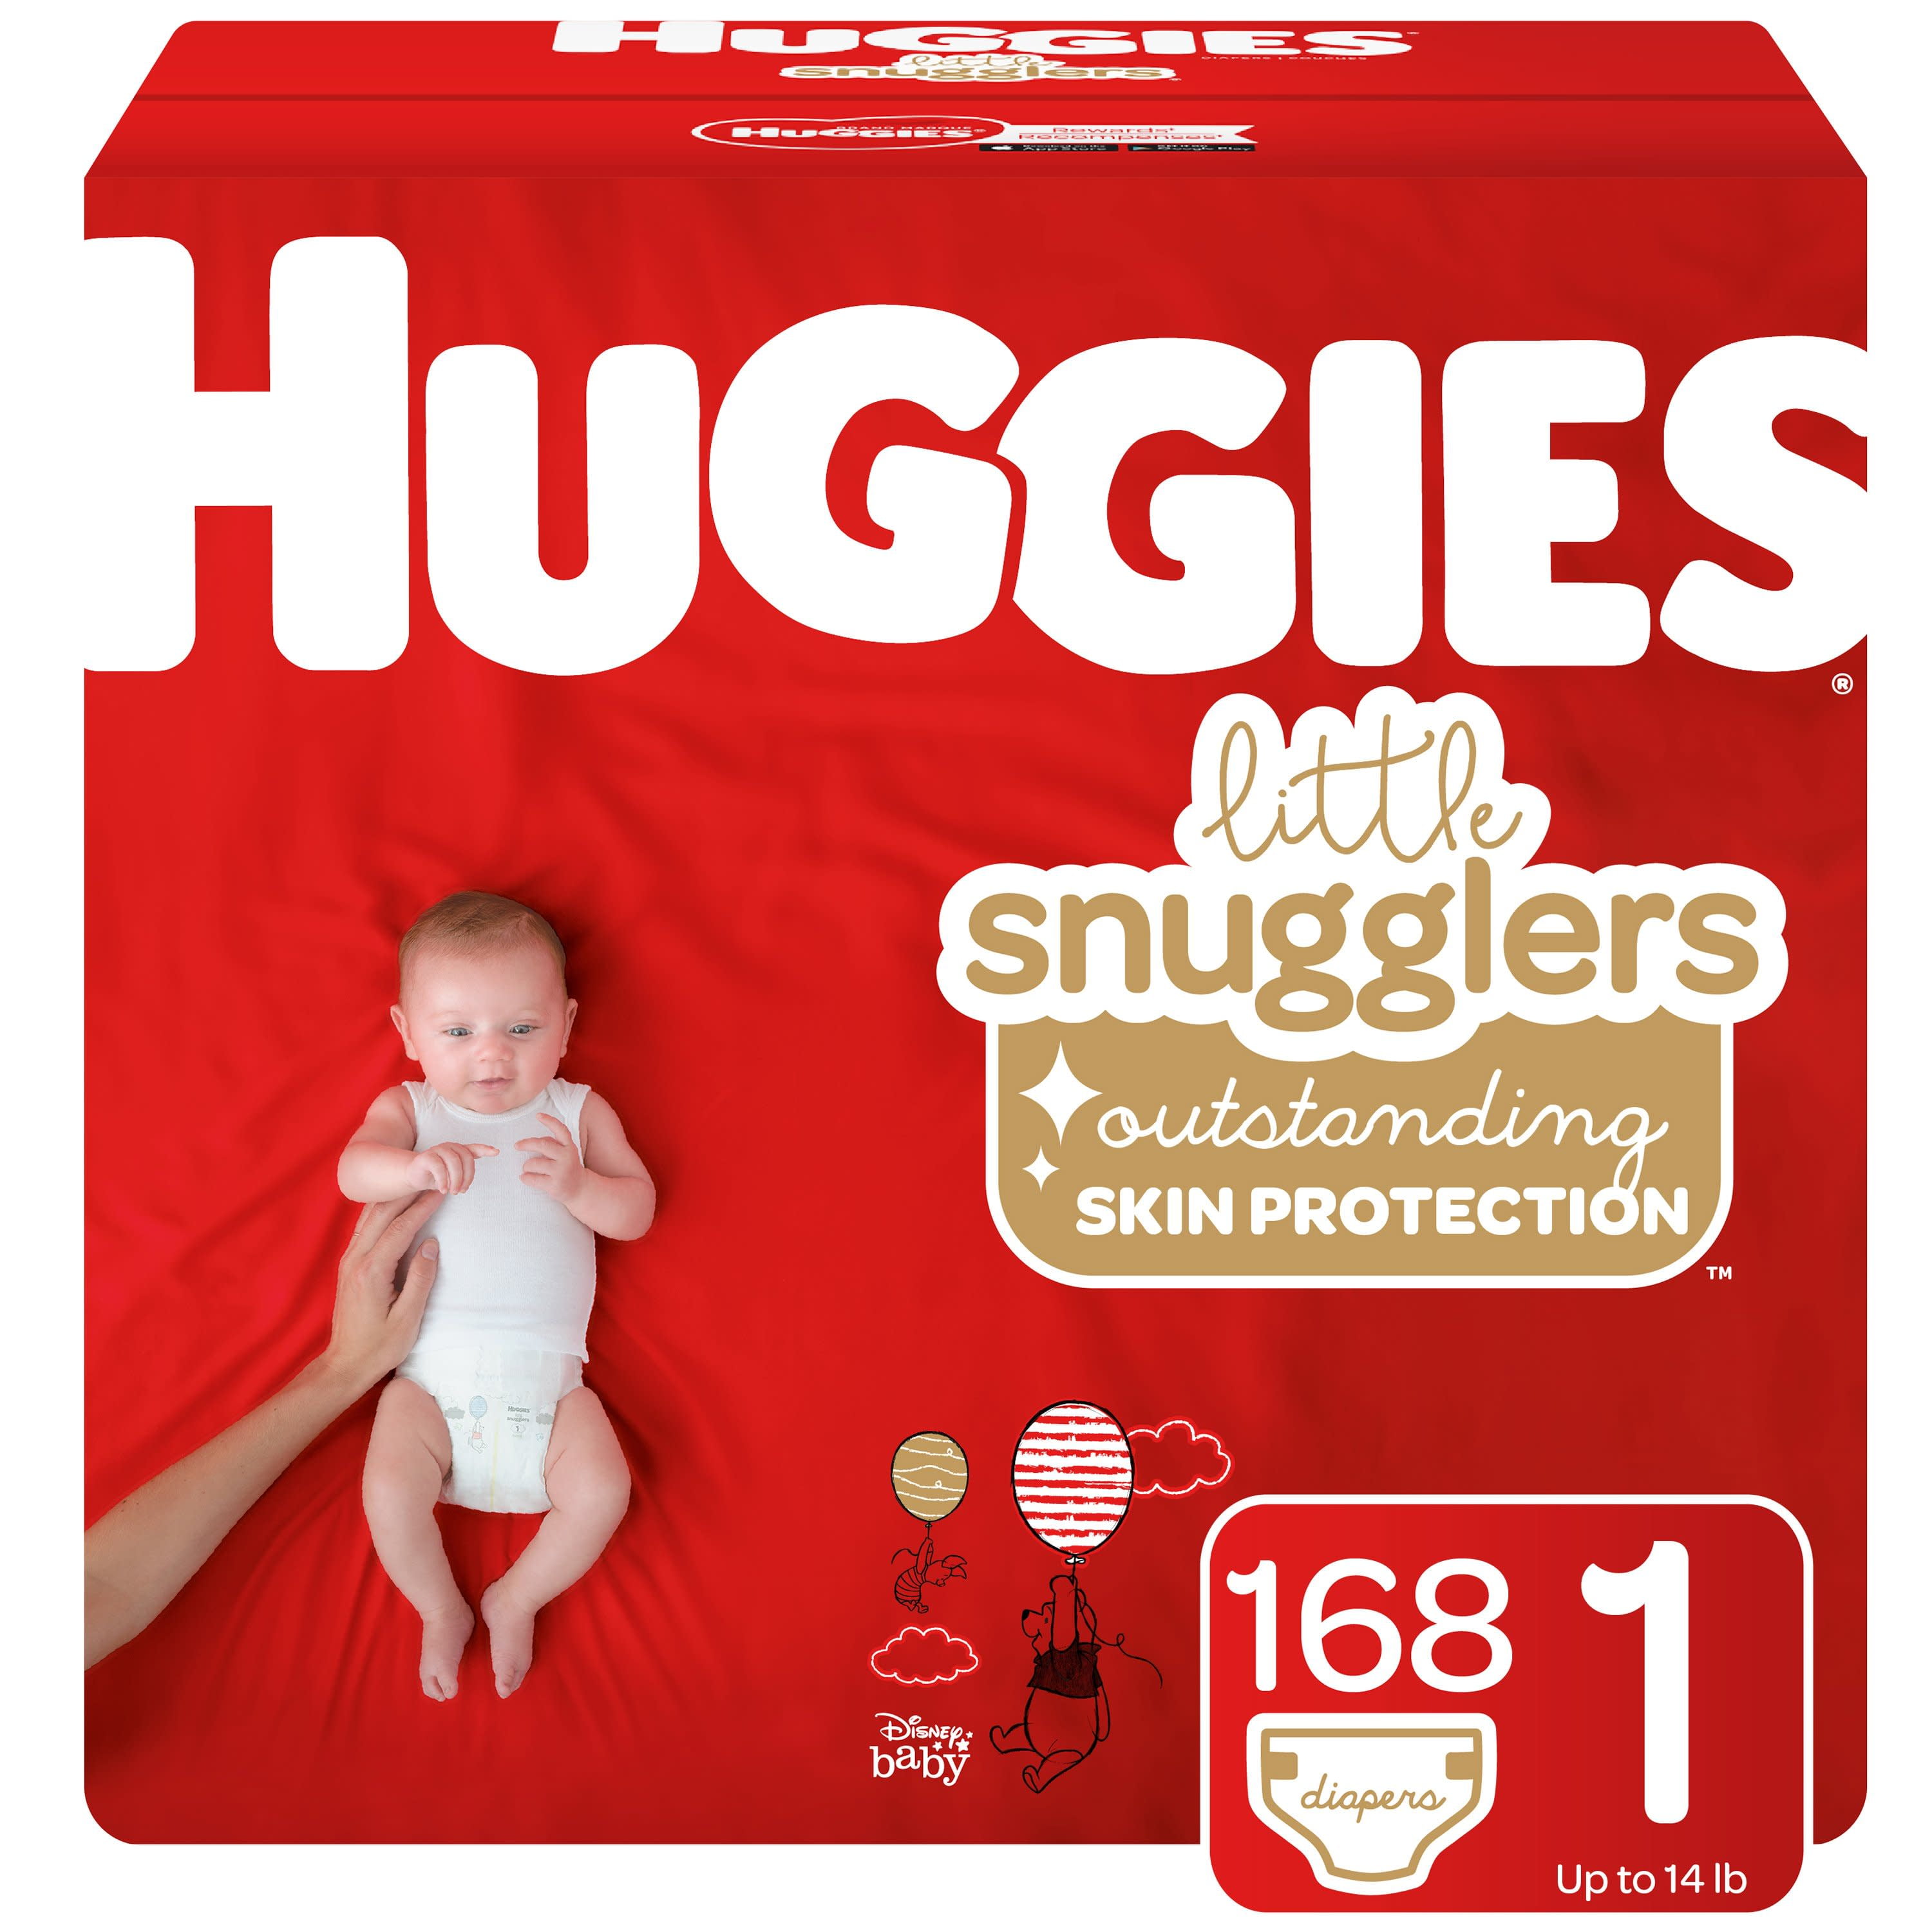 1 diapers